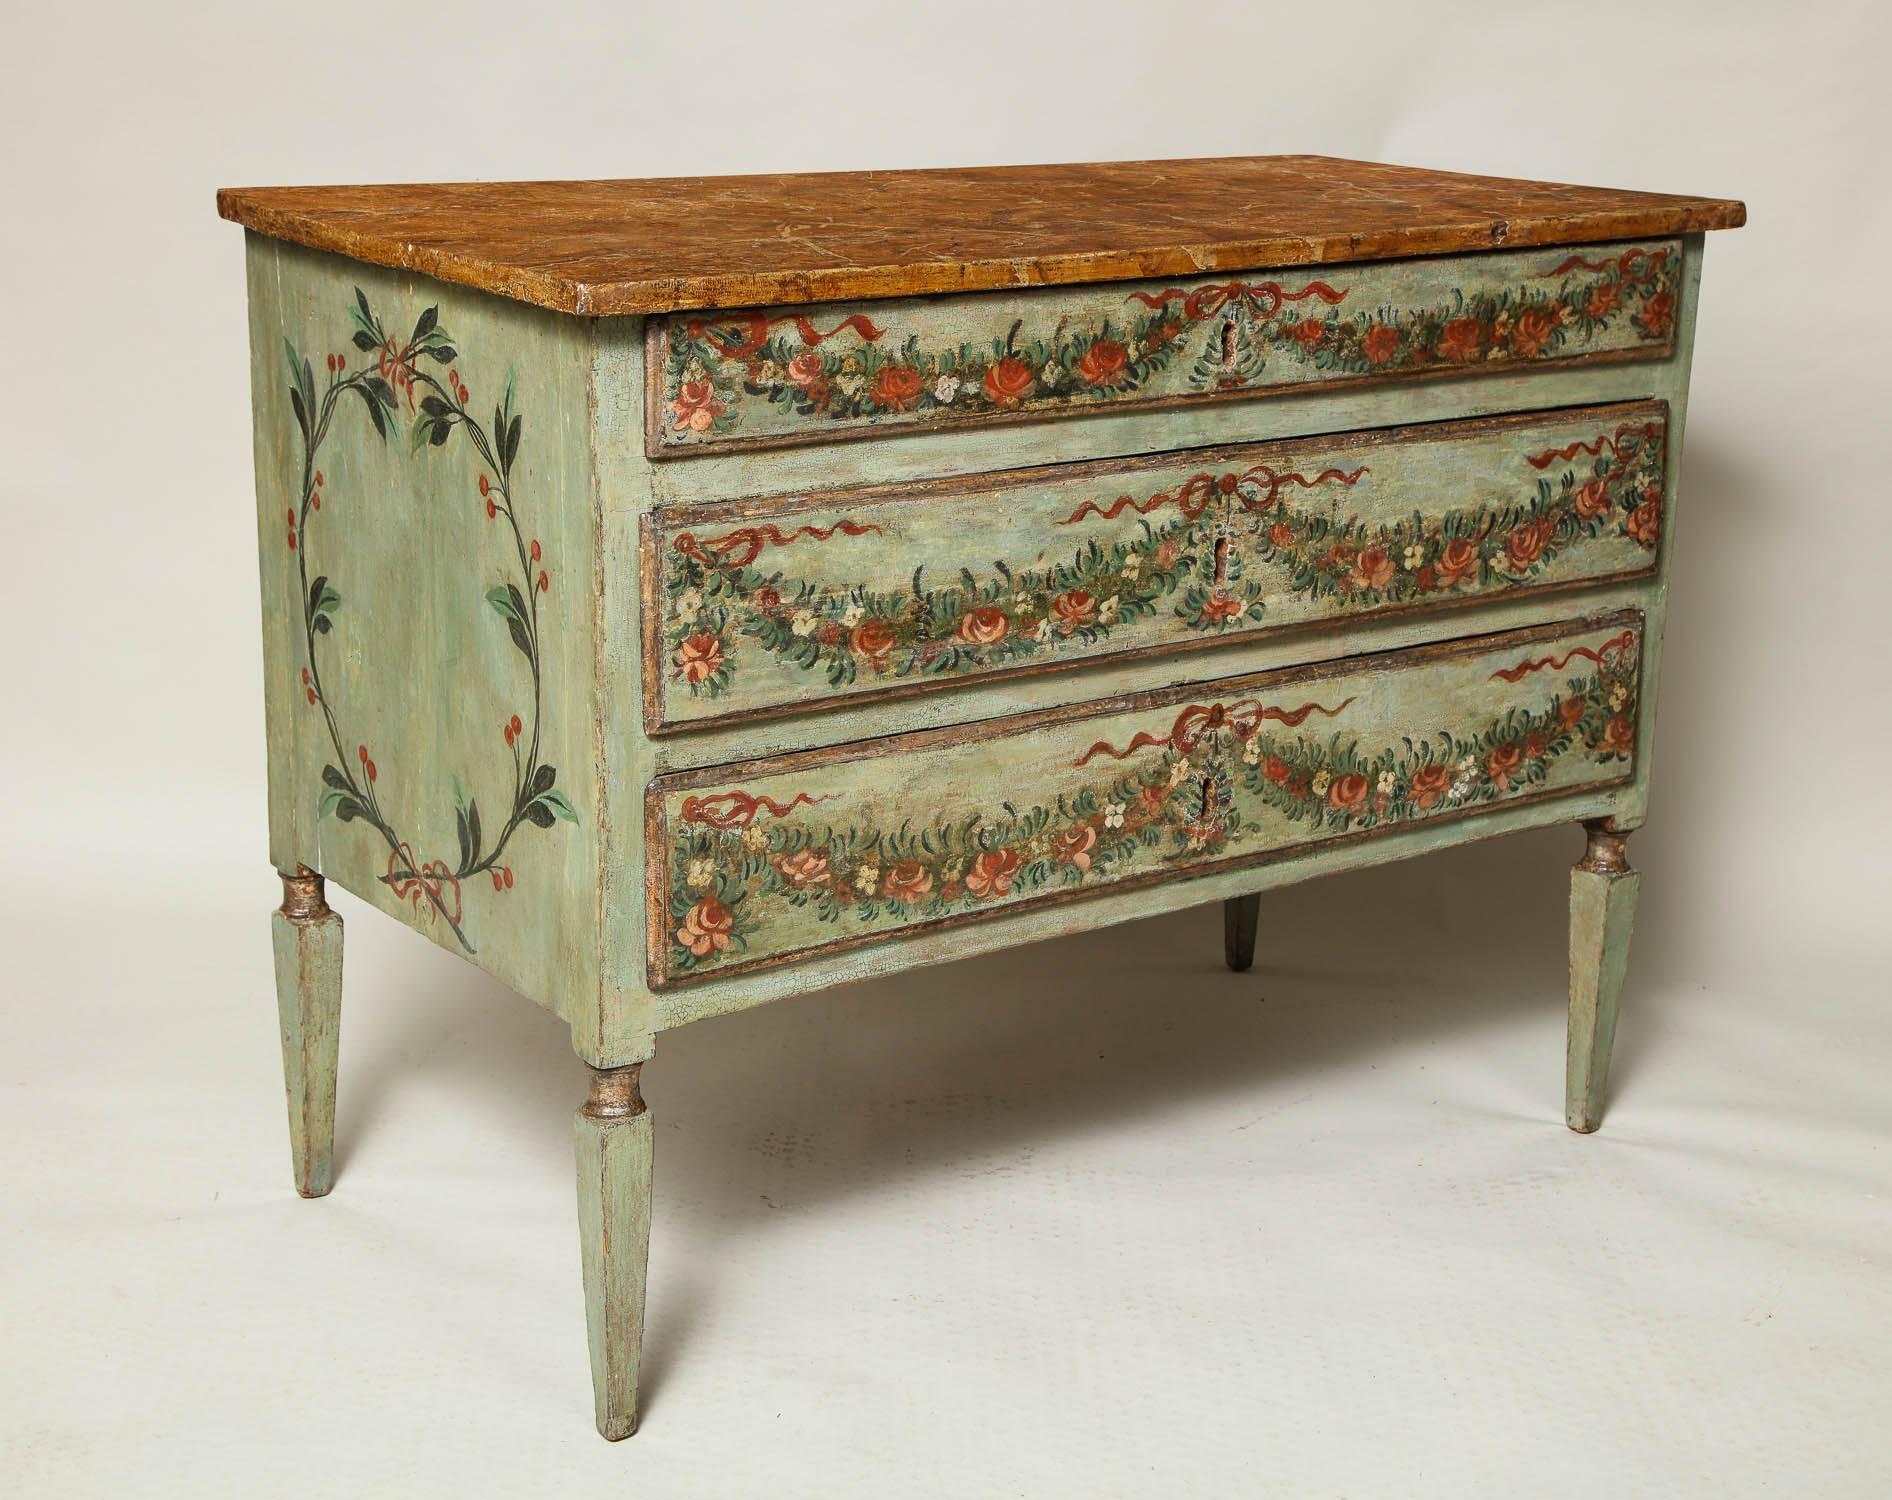 Very fine 18th century Italian, probably Venetian three-drawer commode, the top faux painted to simulate Sienna marble, over three graduated drawers festooned with floral and ribbon swags, standing on square tapered legs with ring turned collars,